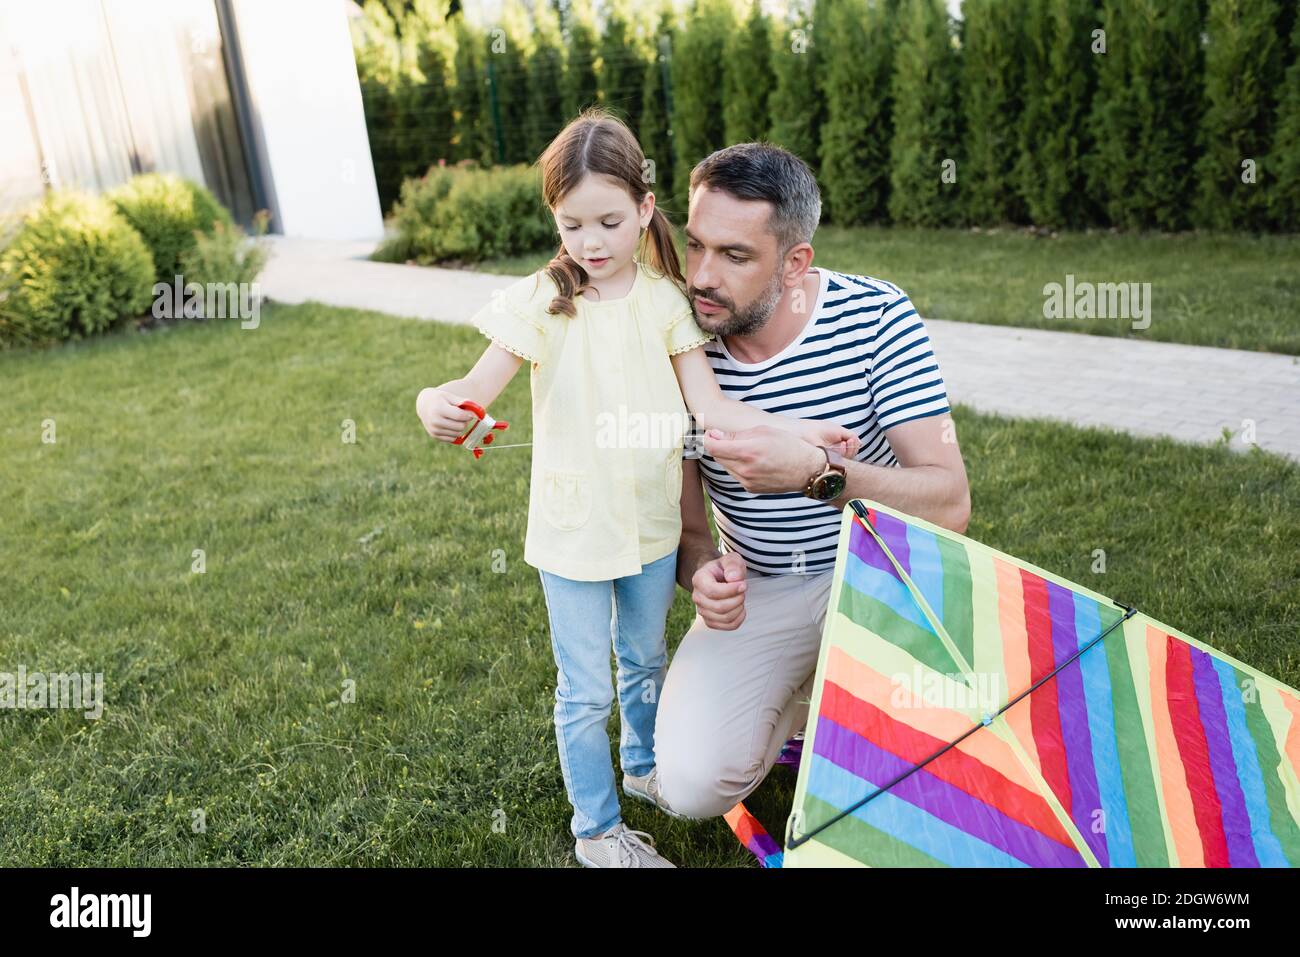 Daughter with kite string holder standing with father squatting near on lawn on blurred background Stock Photo